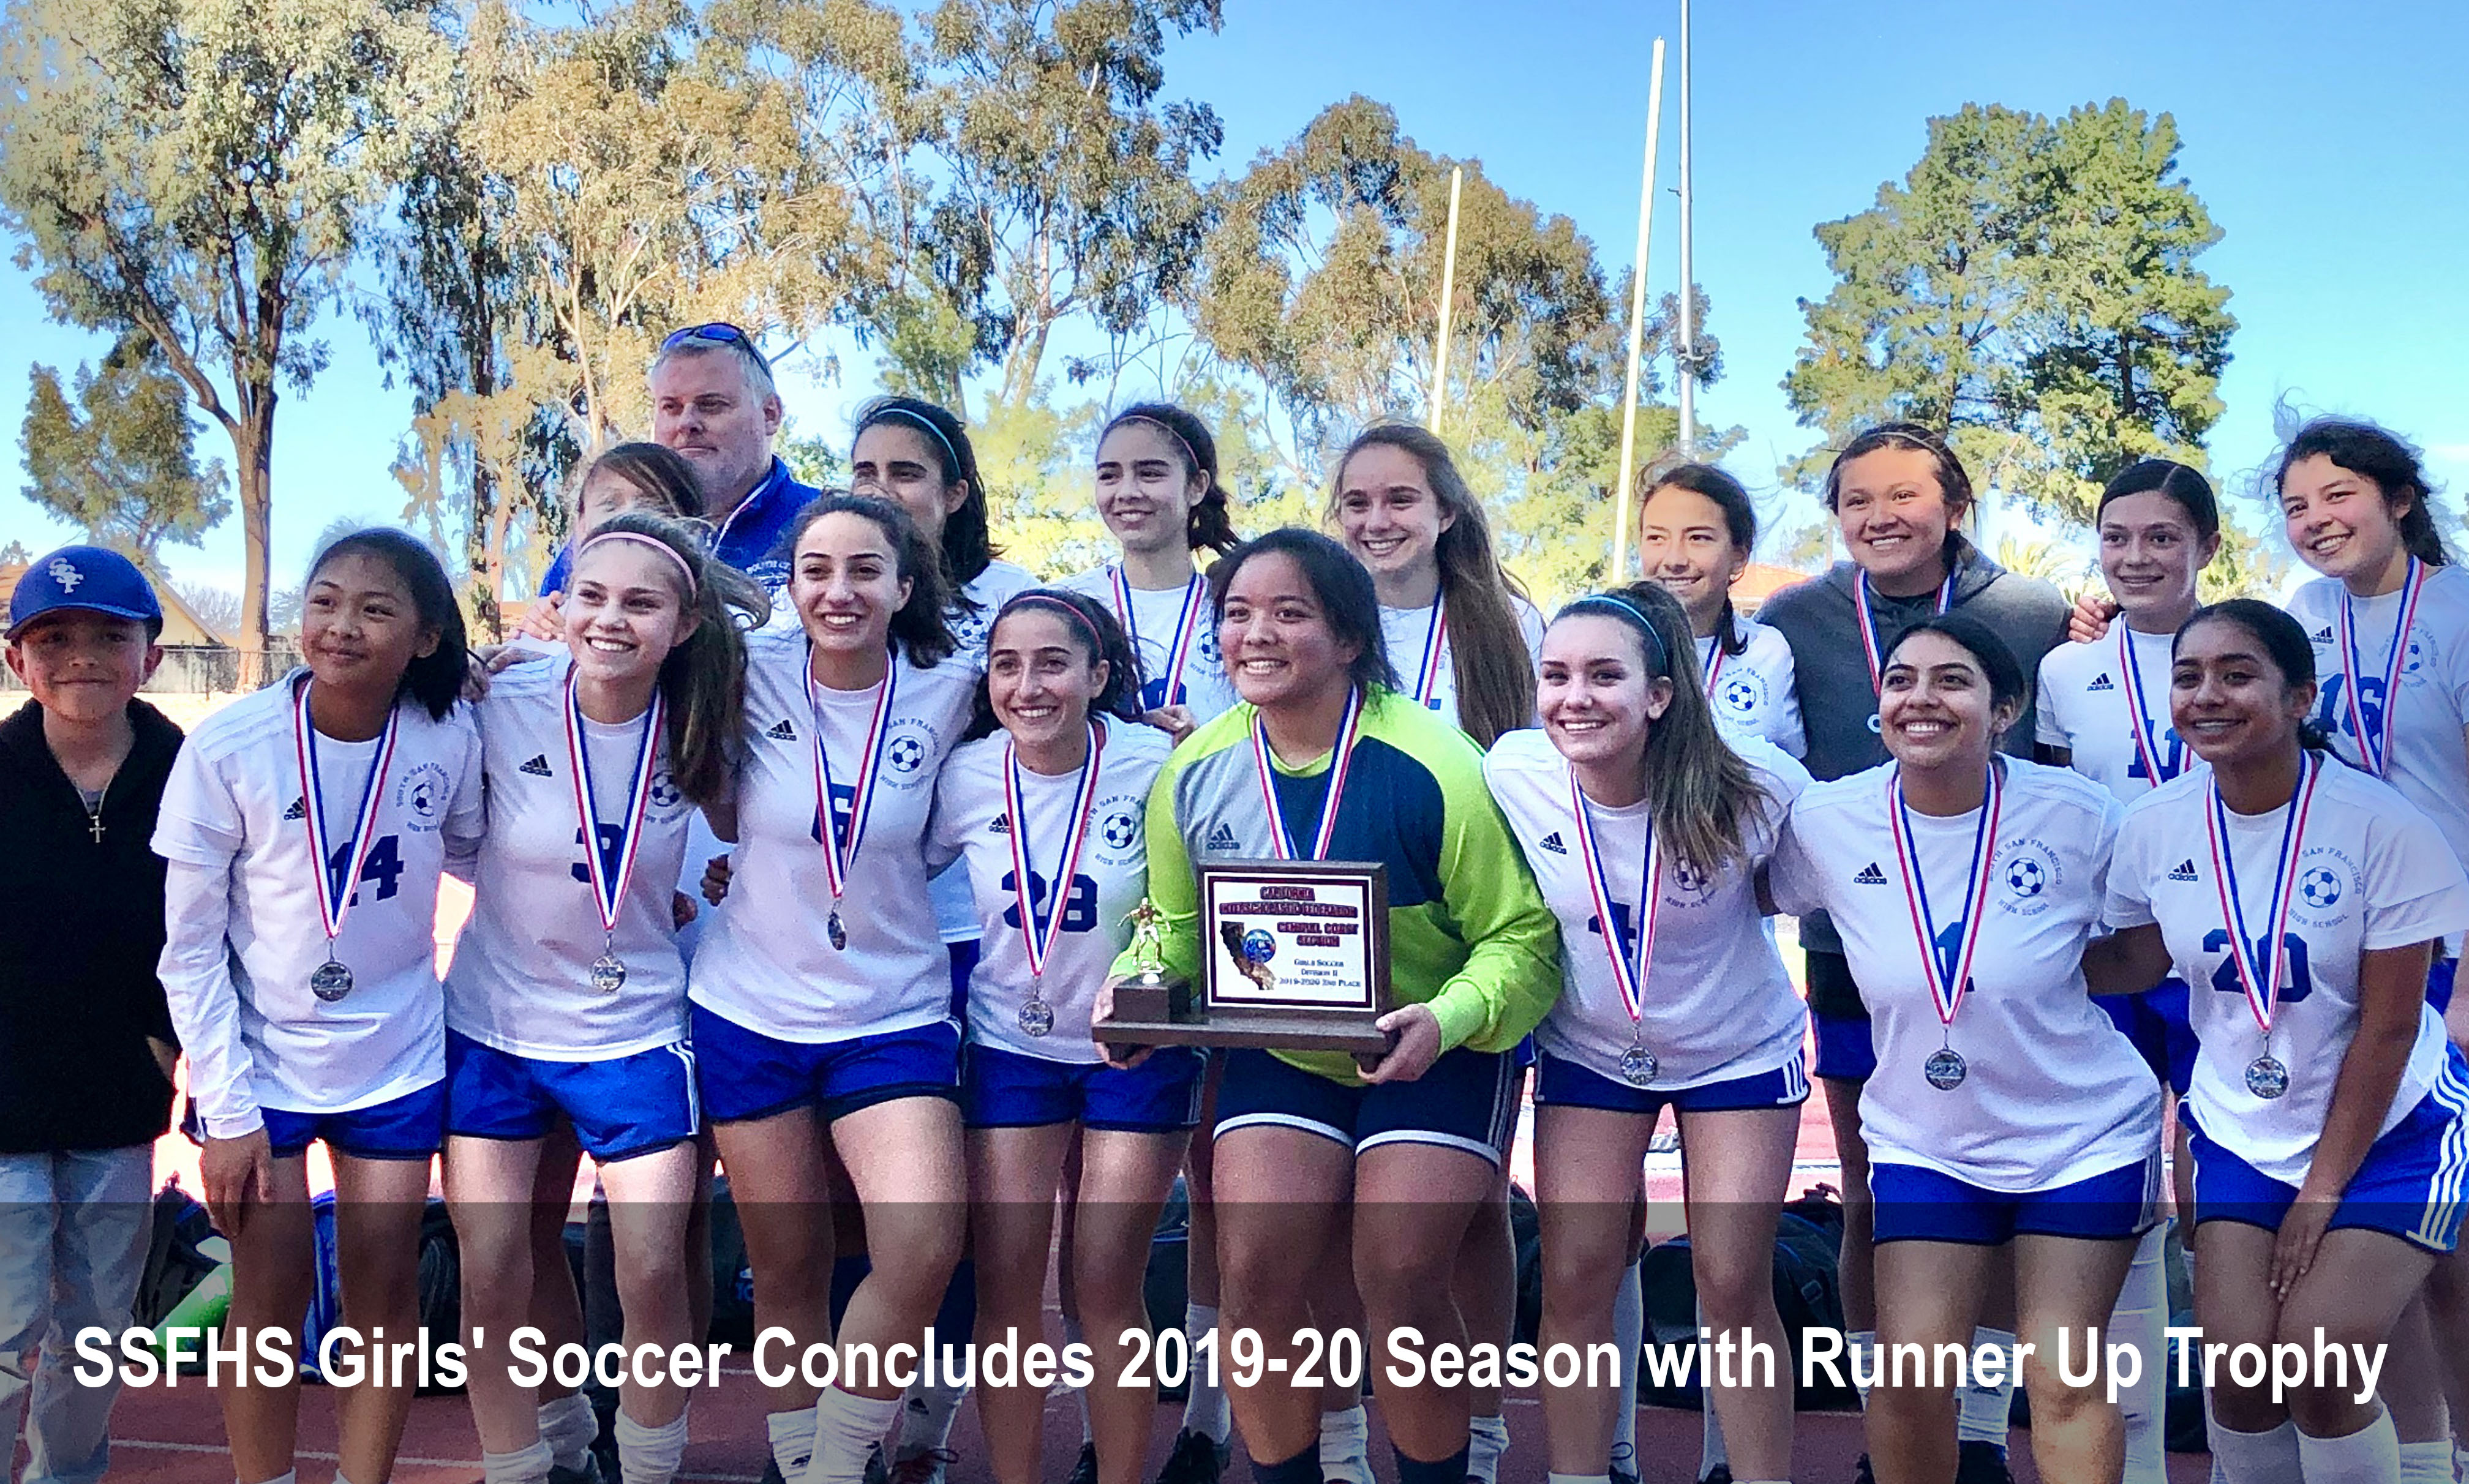 SSFHS Girls' Soccer Closes Out 2019-20 Season with Runner Up Trophy